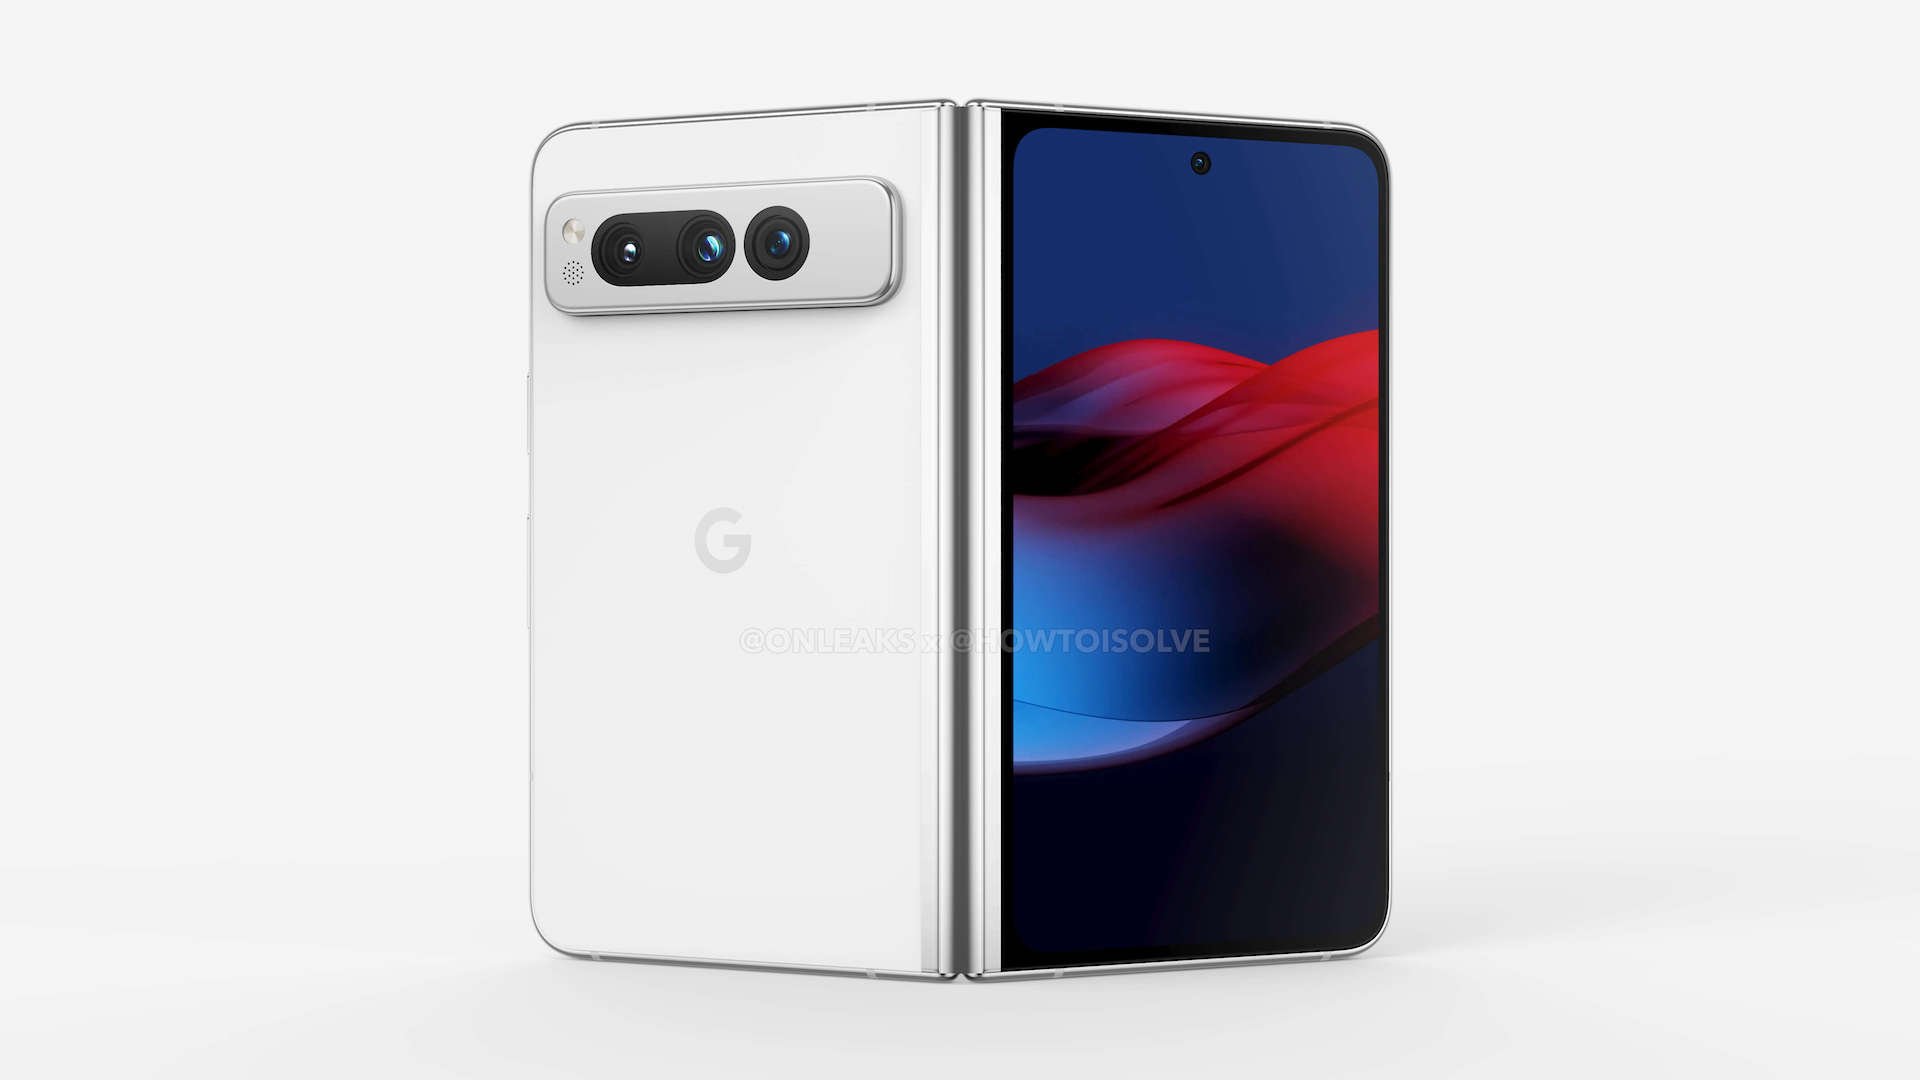 Renders of the foldable Google Pixel Fold smartphone have been found